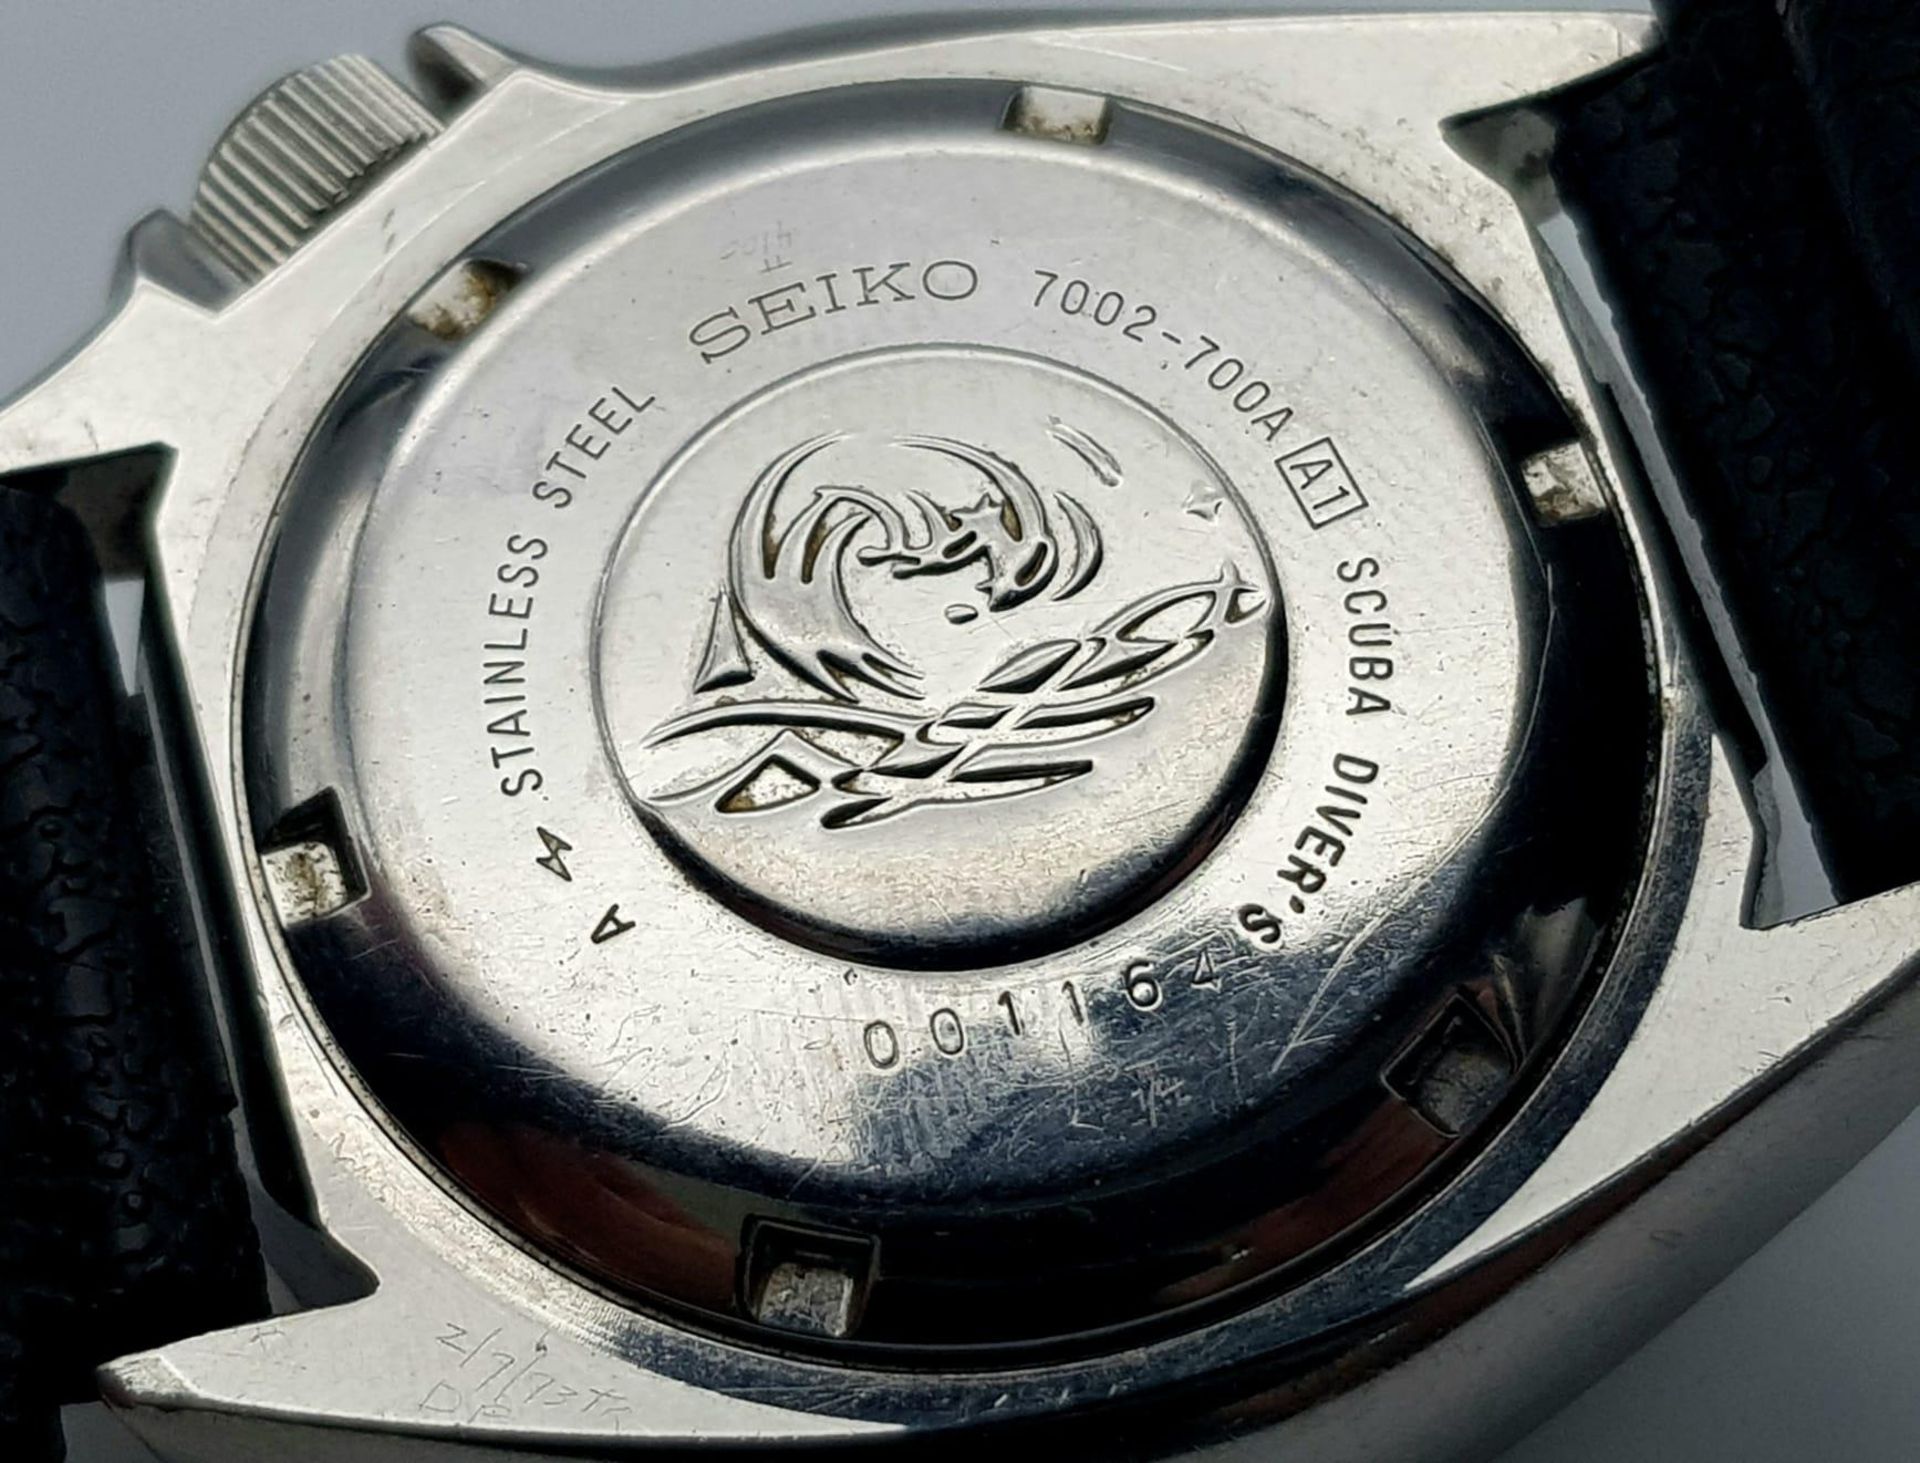 A VINTAGE SEIKO AUTOMATIC DIVERS WATCH (GLASS IS SCRATCHED)a/f - Image 5 of 5